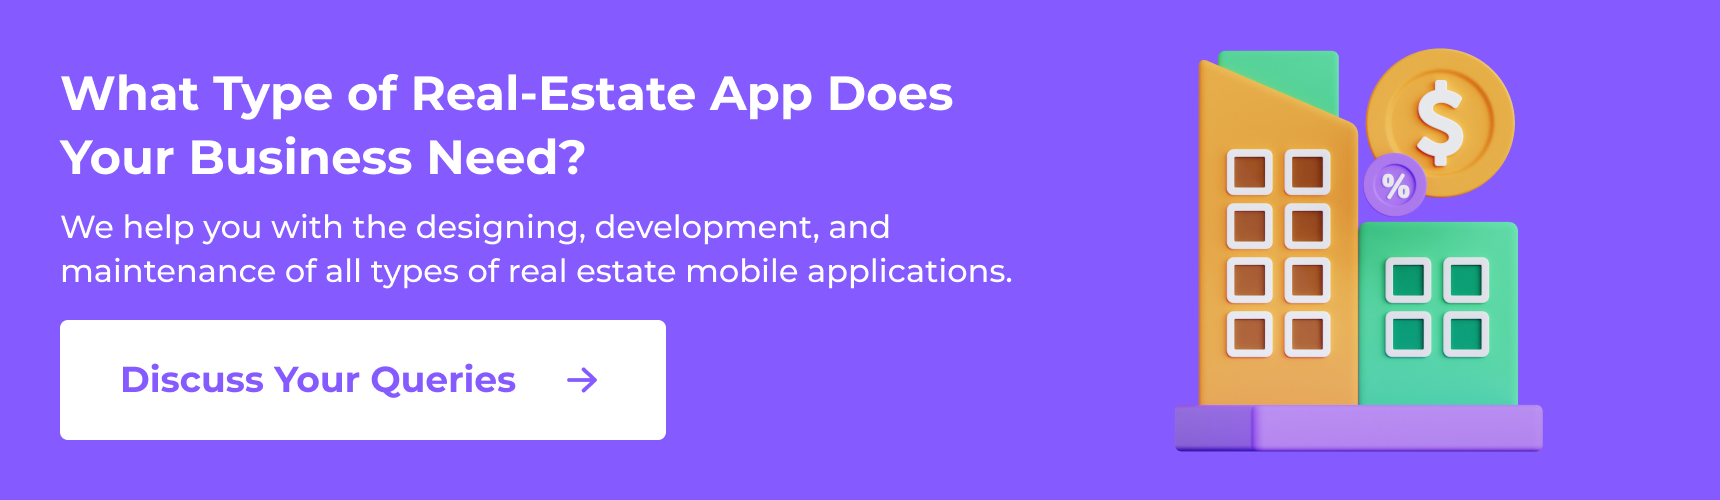 What Type of Real-Estate App Does Your Business Need? We help you with the designing, development, and maintenance of all types of real estate mobile applications. 